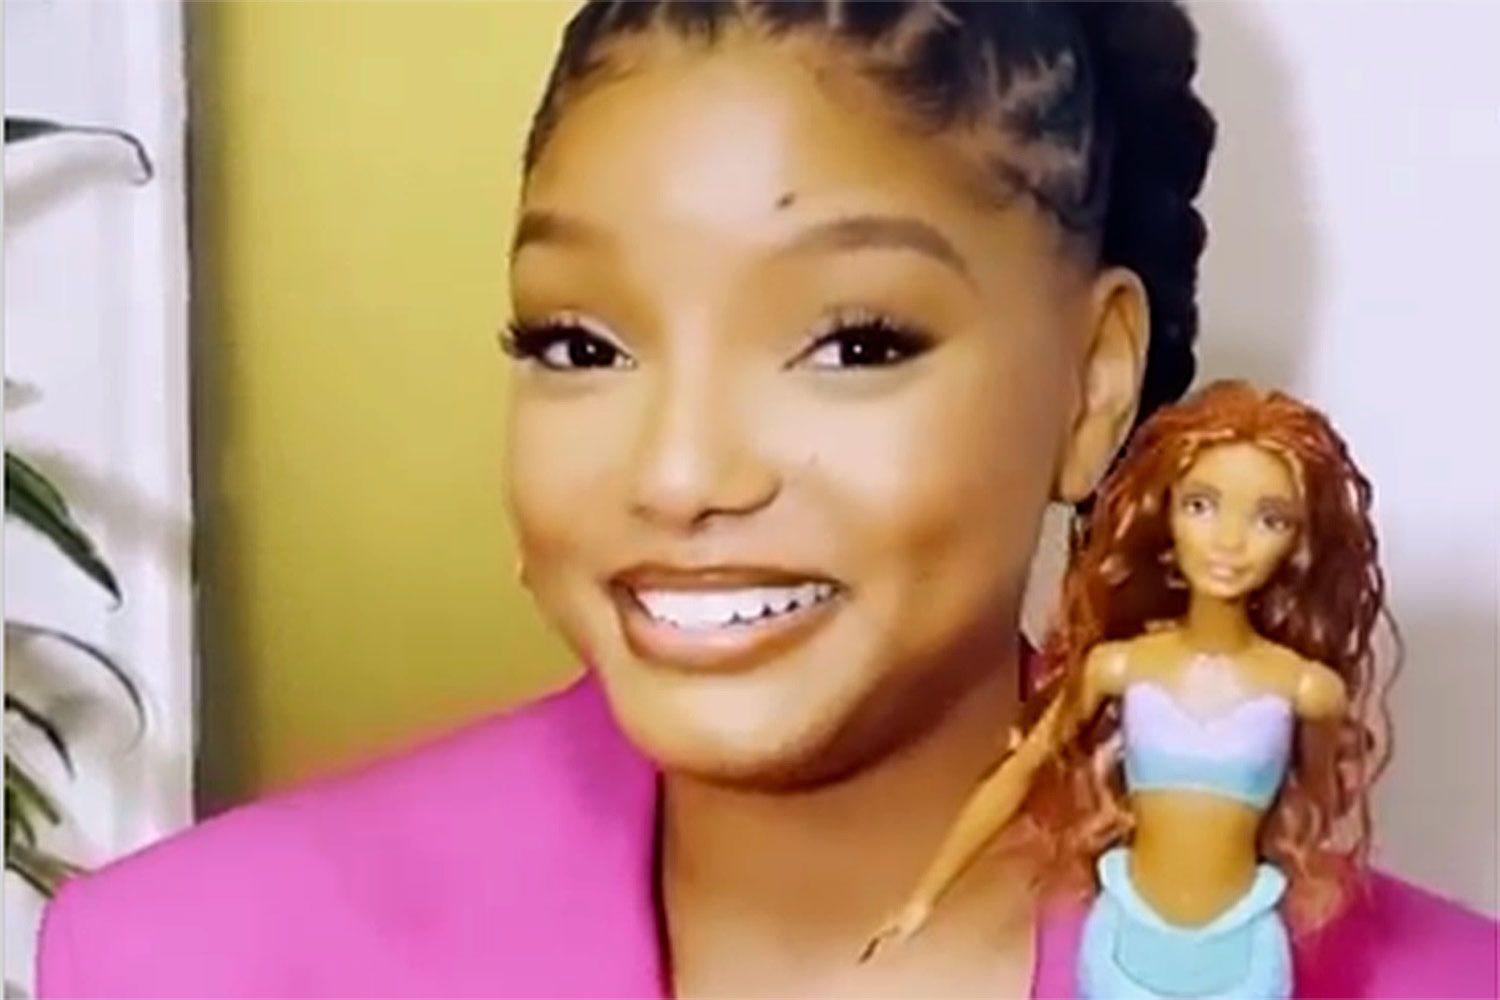 Halle Bailey Excited After Getting Her Own Little Mermaid
Doll: “BRB Gonna Go Cry Now!”